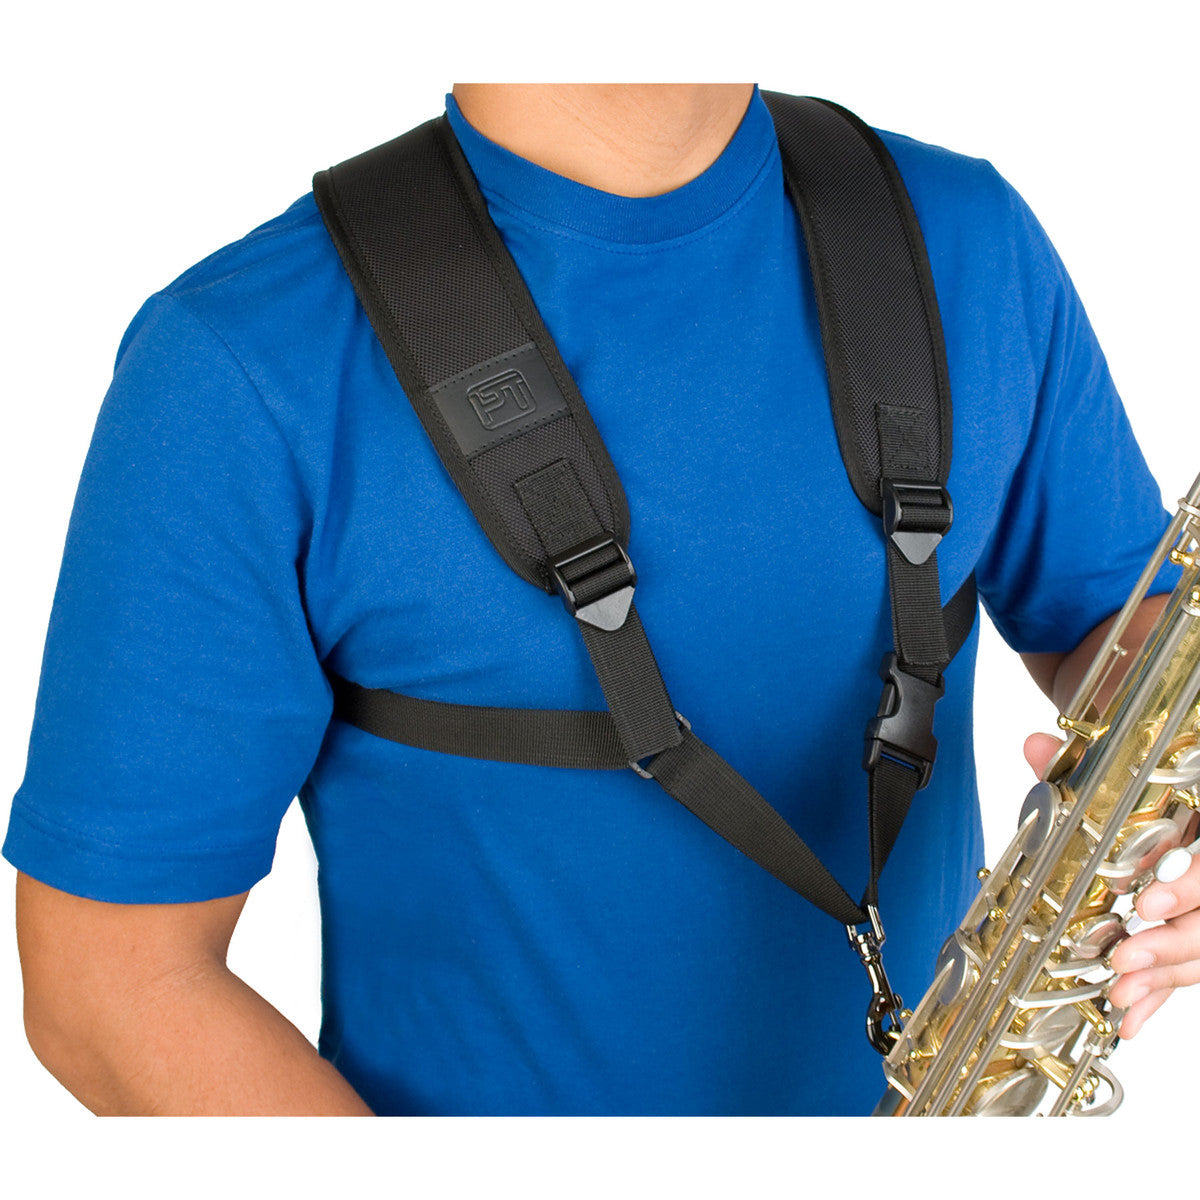 Protec Large Universal Sax Harness with Metal Snaps